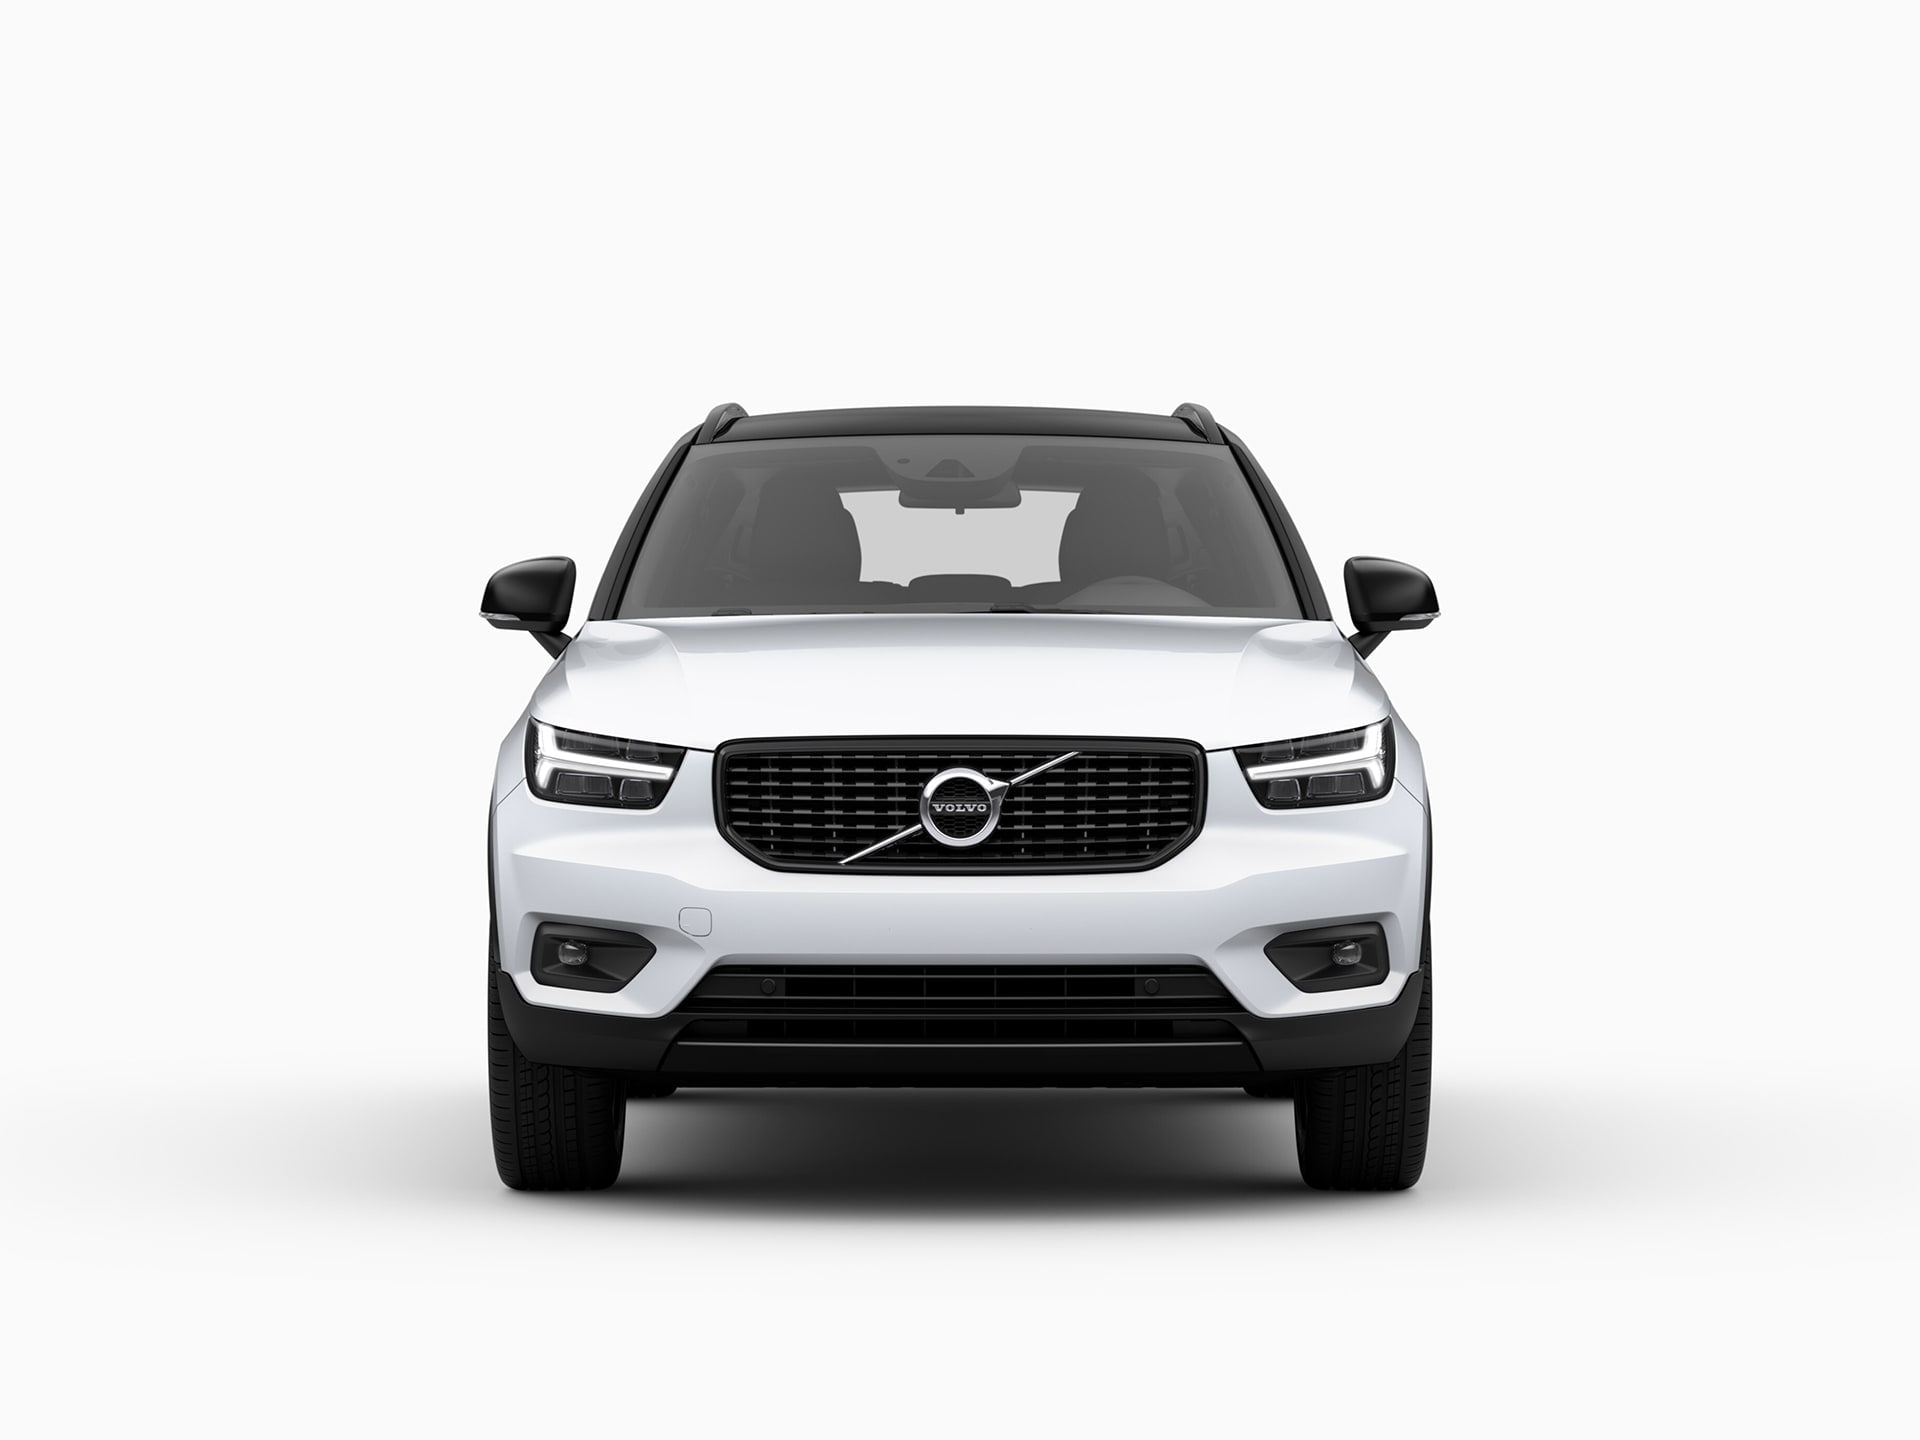 The front of a Volvo XC40 SUV.